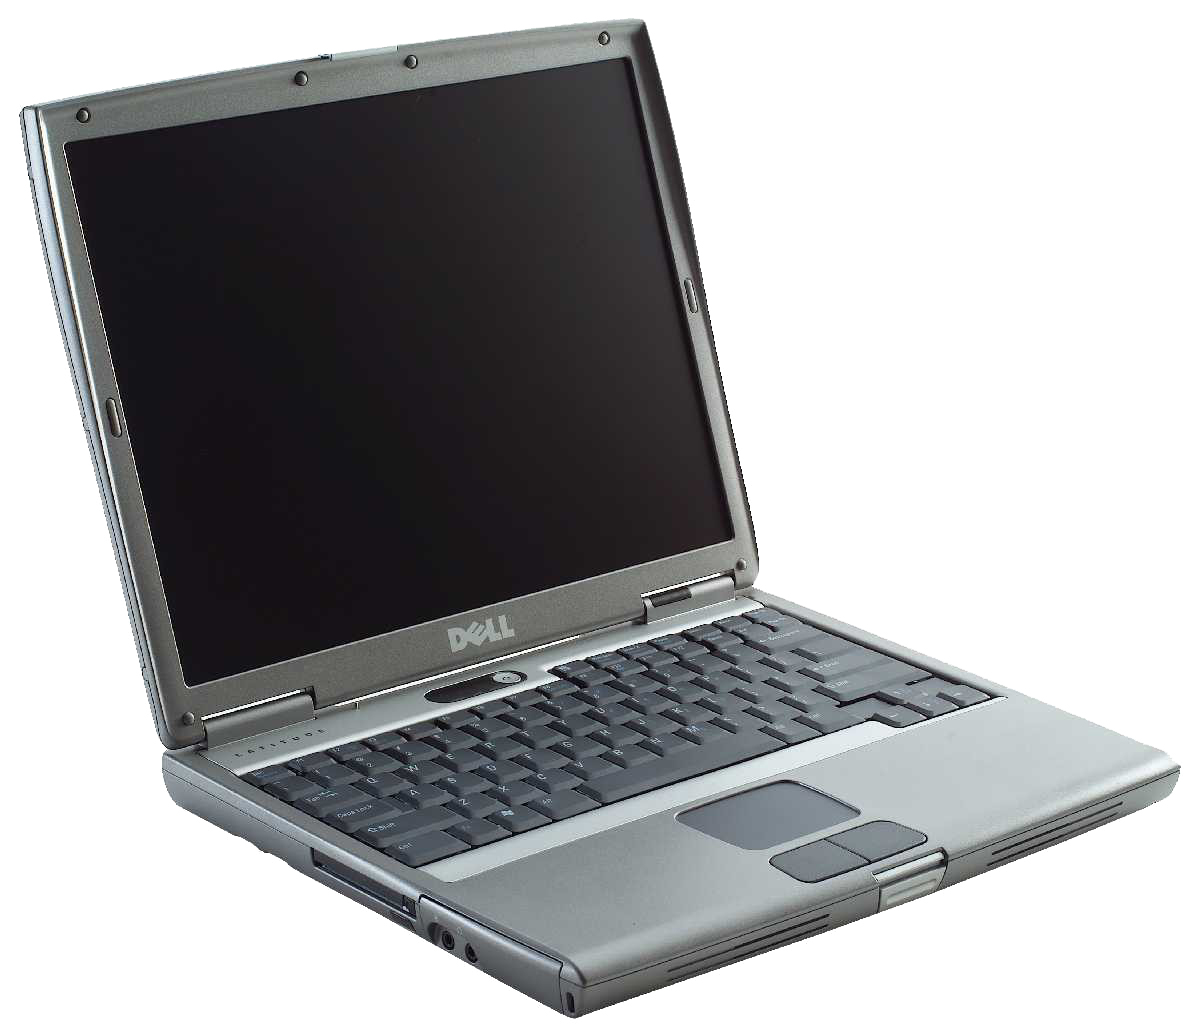 Dell windows 7 laptop recovery disk